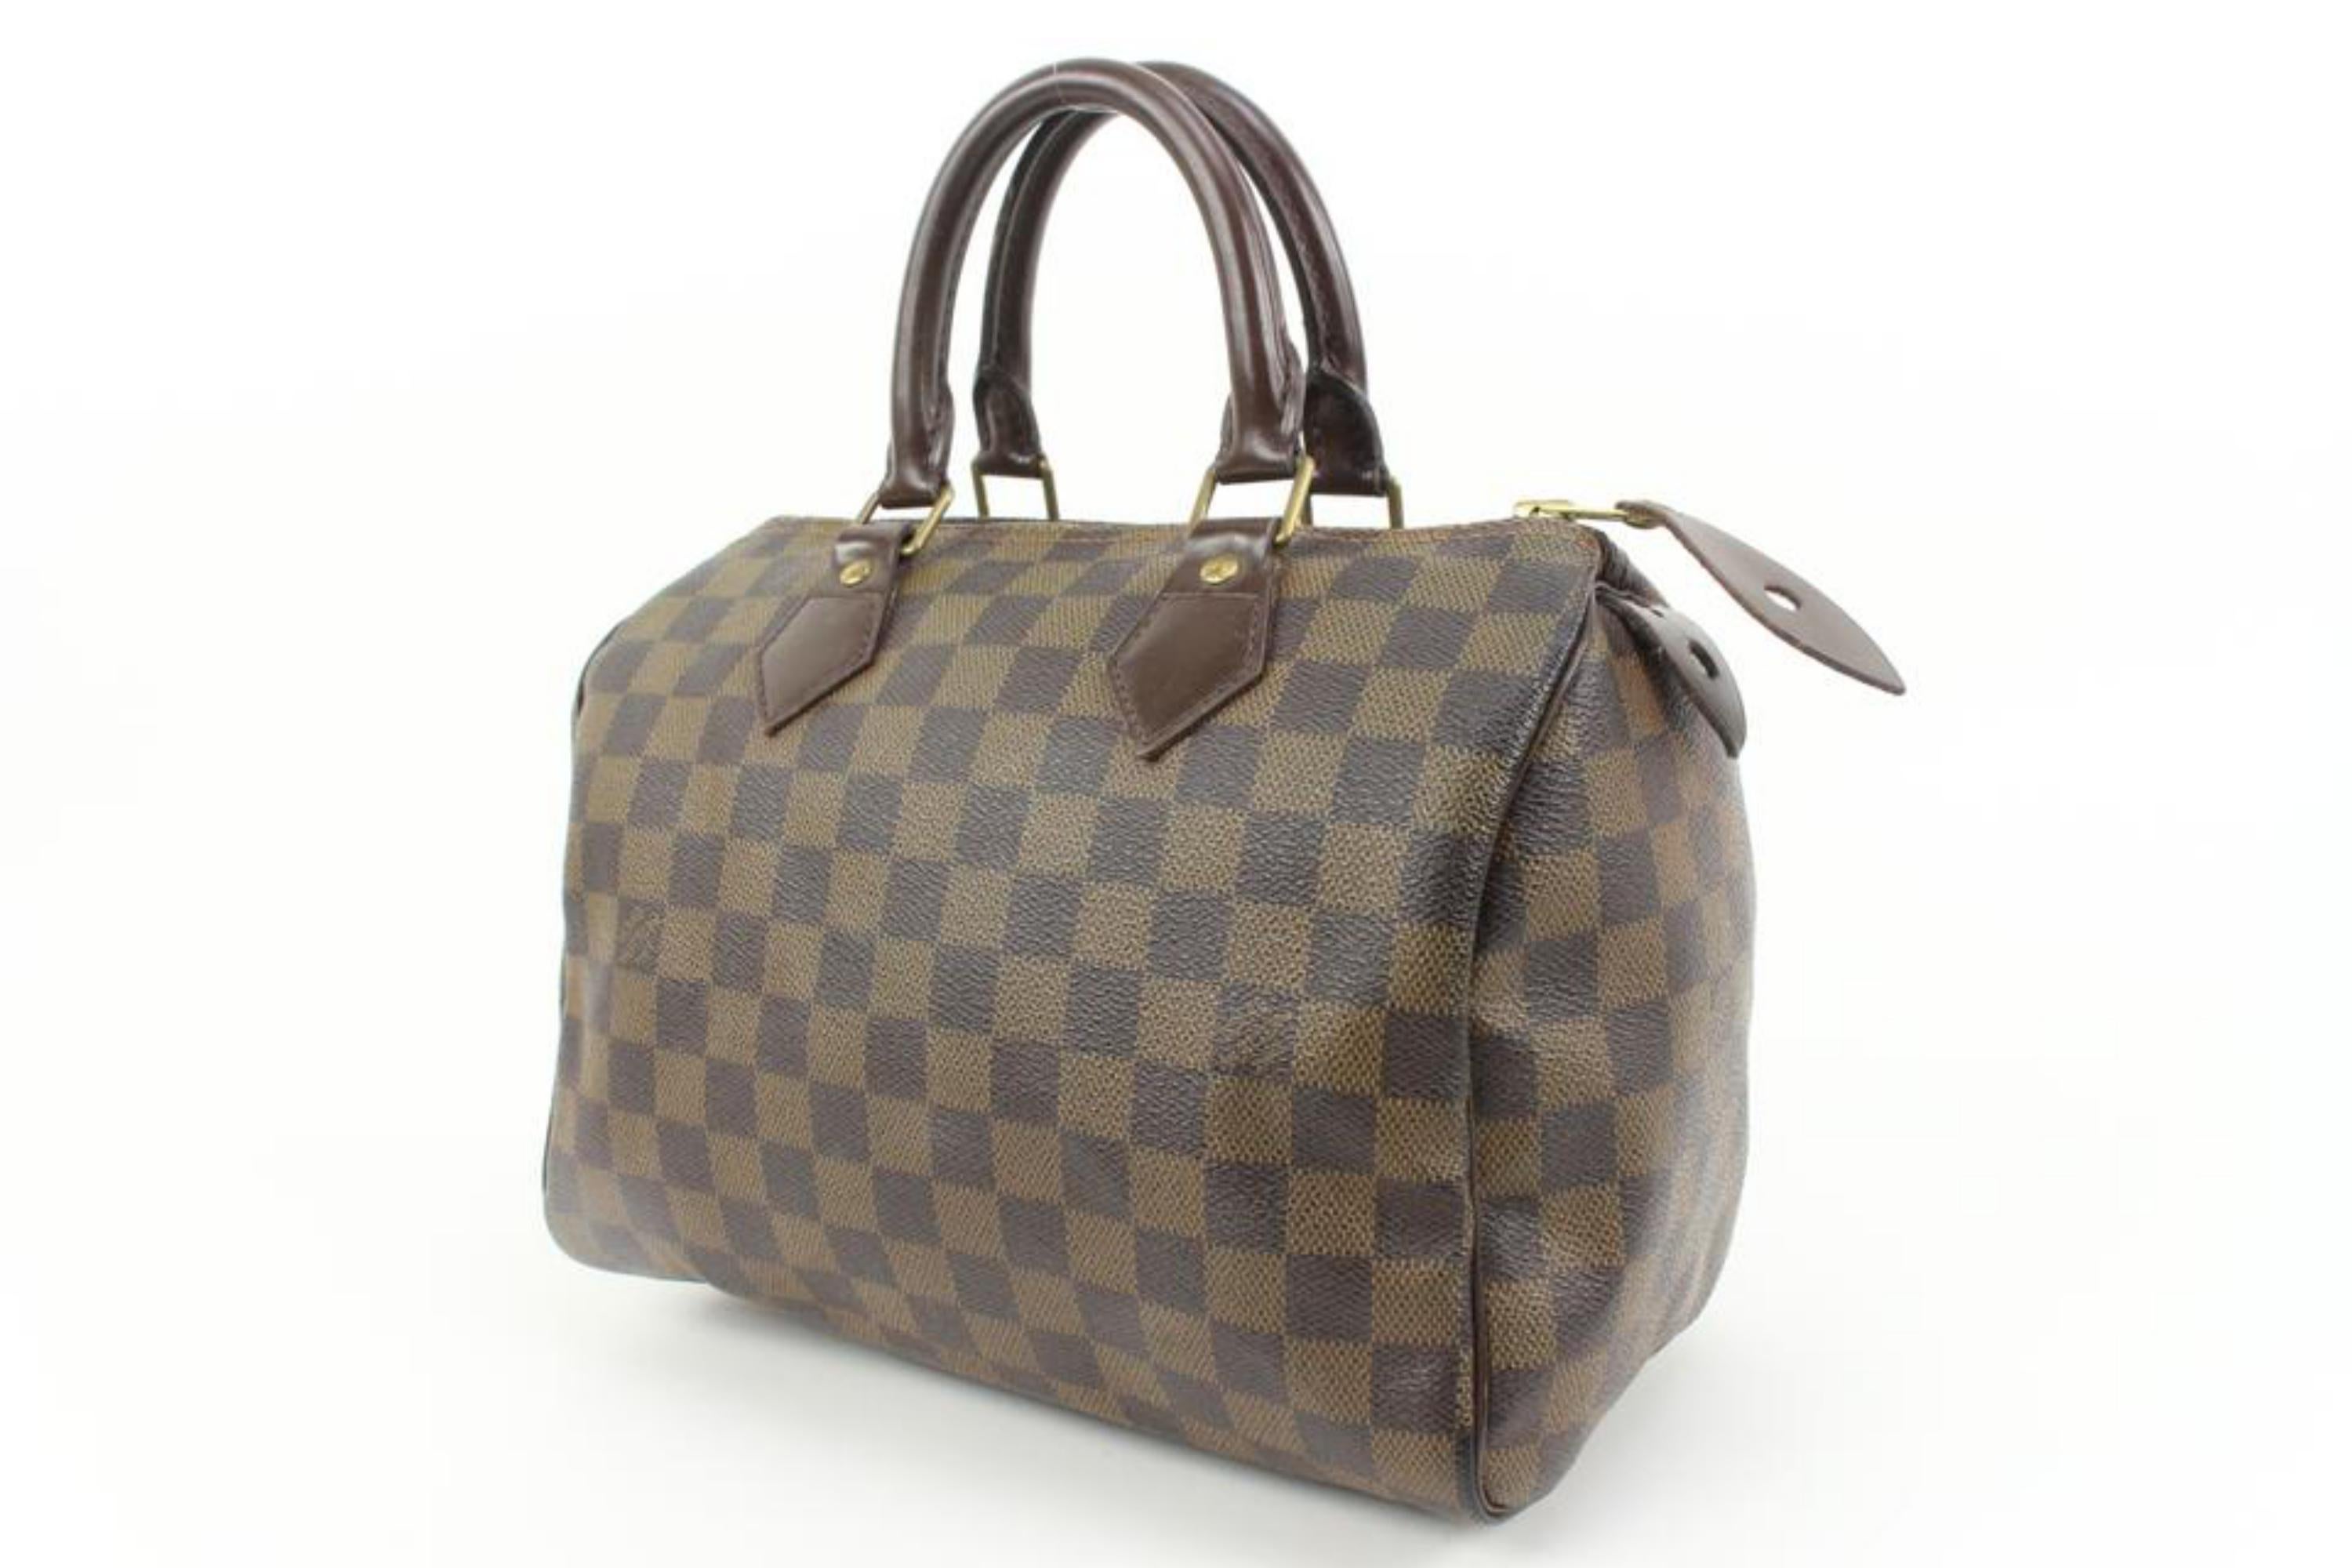 Louis Vuitton Small Damier Ebene Speedy 25 Boston Bag PM 87lv33s
Date Code/Serial Number: SP4067
Made In: France
Measurements: Length:  10